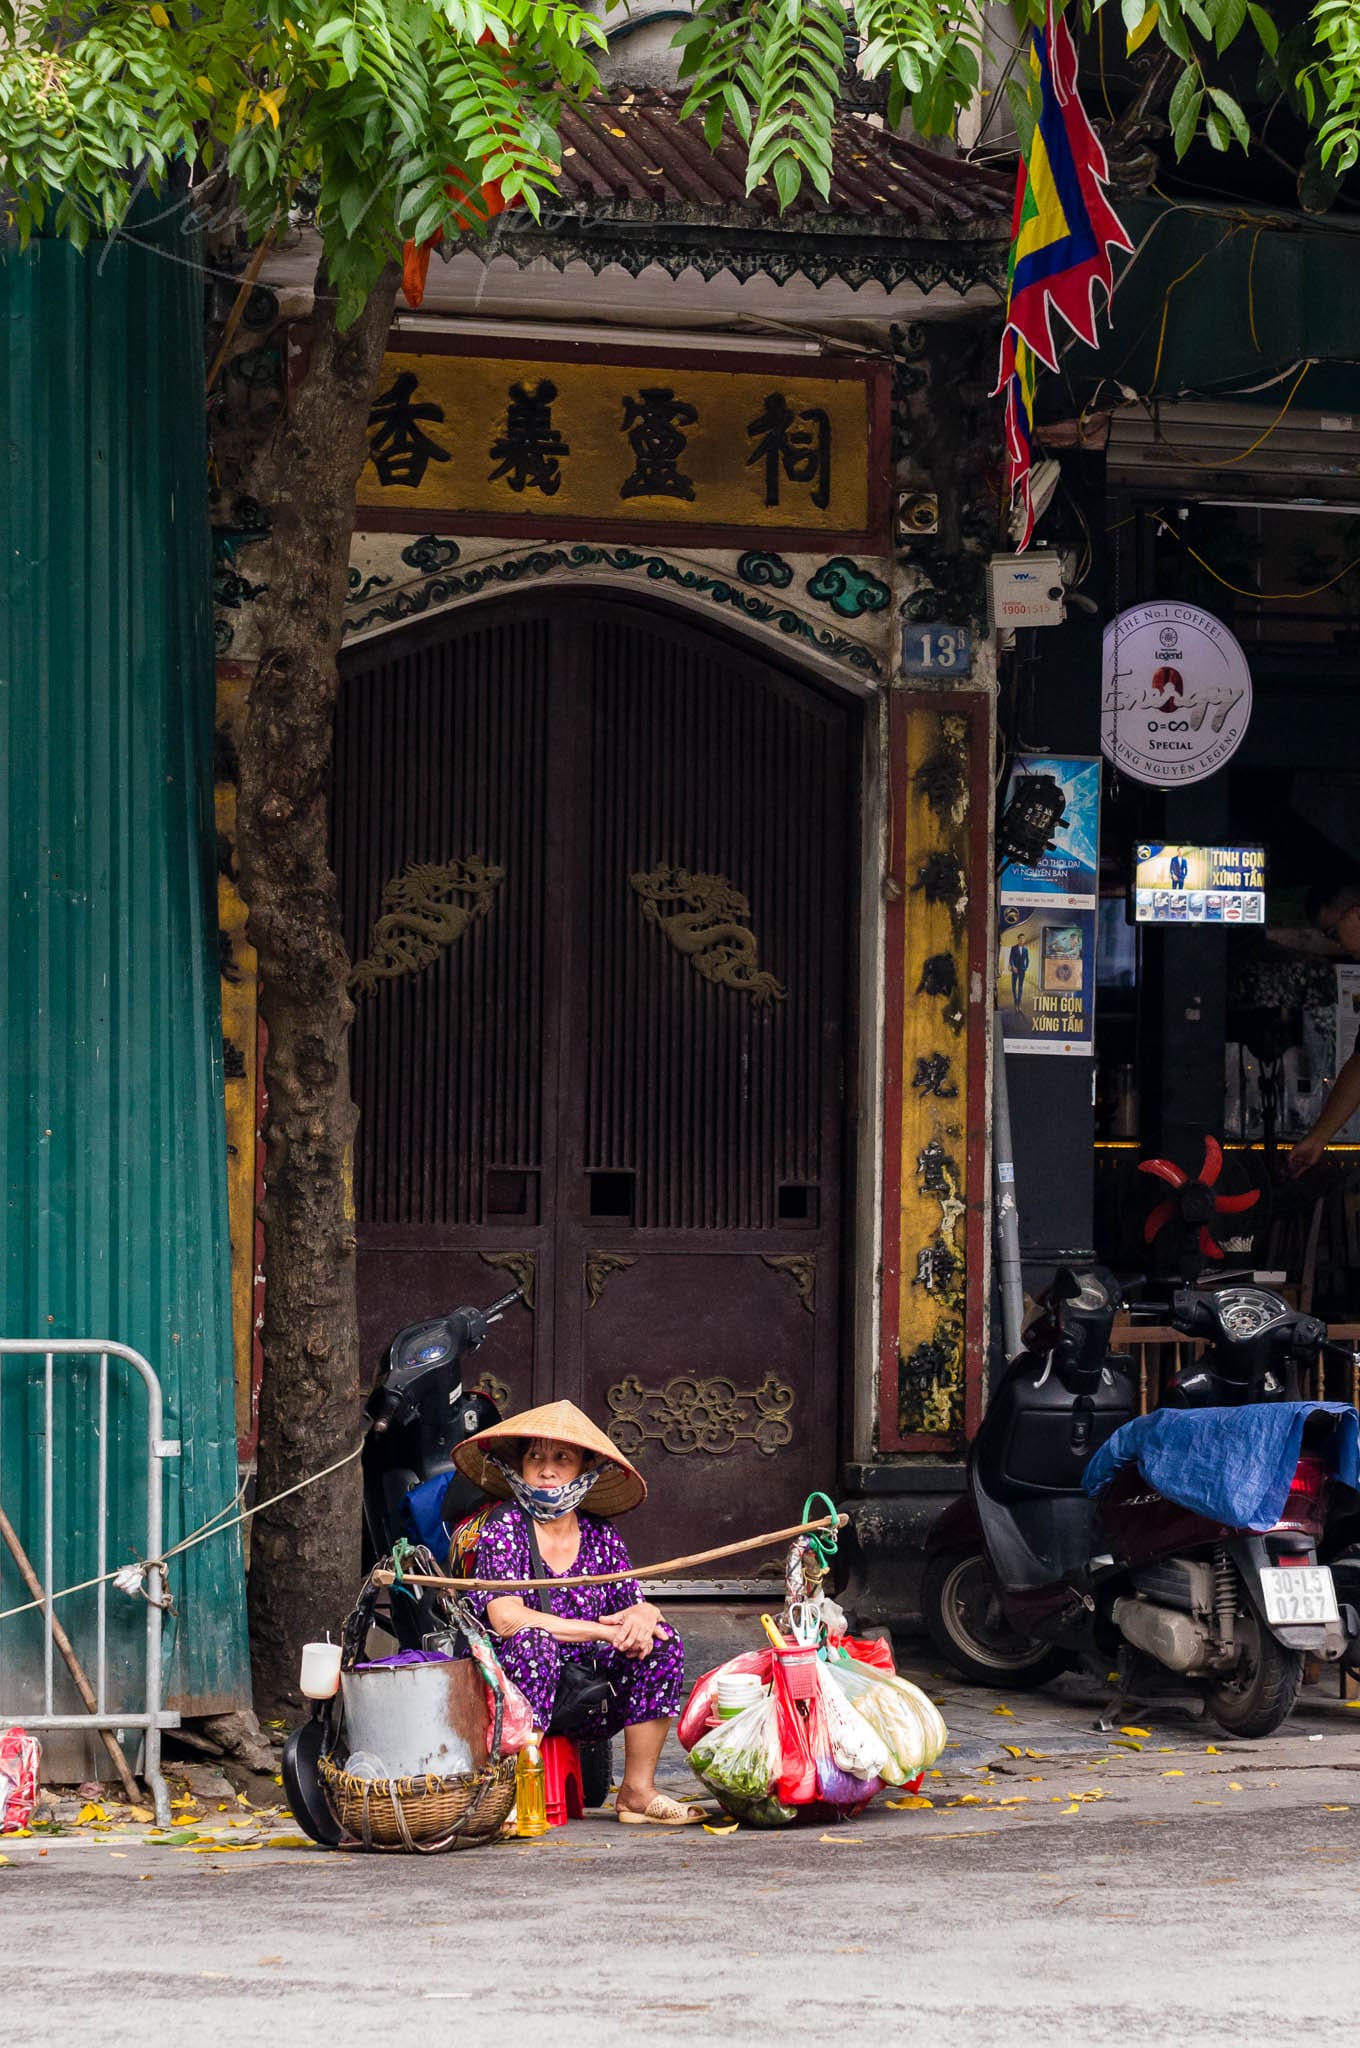 Traditional Vietnamese vendor preparing goods in a historical Southeast Asian street setting.